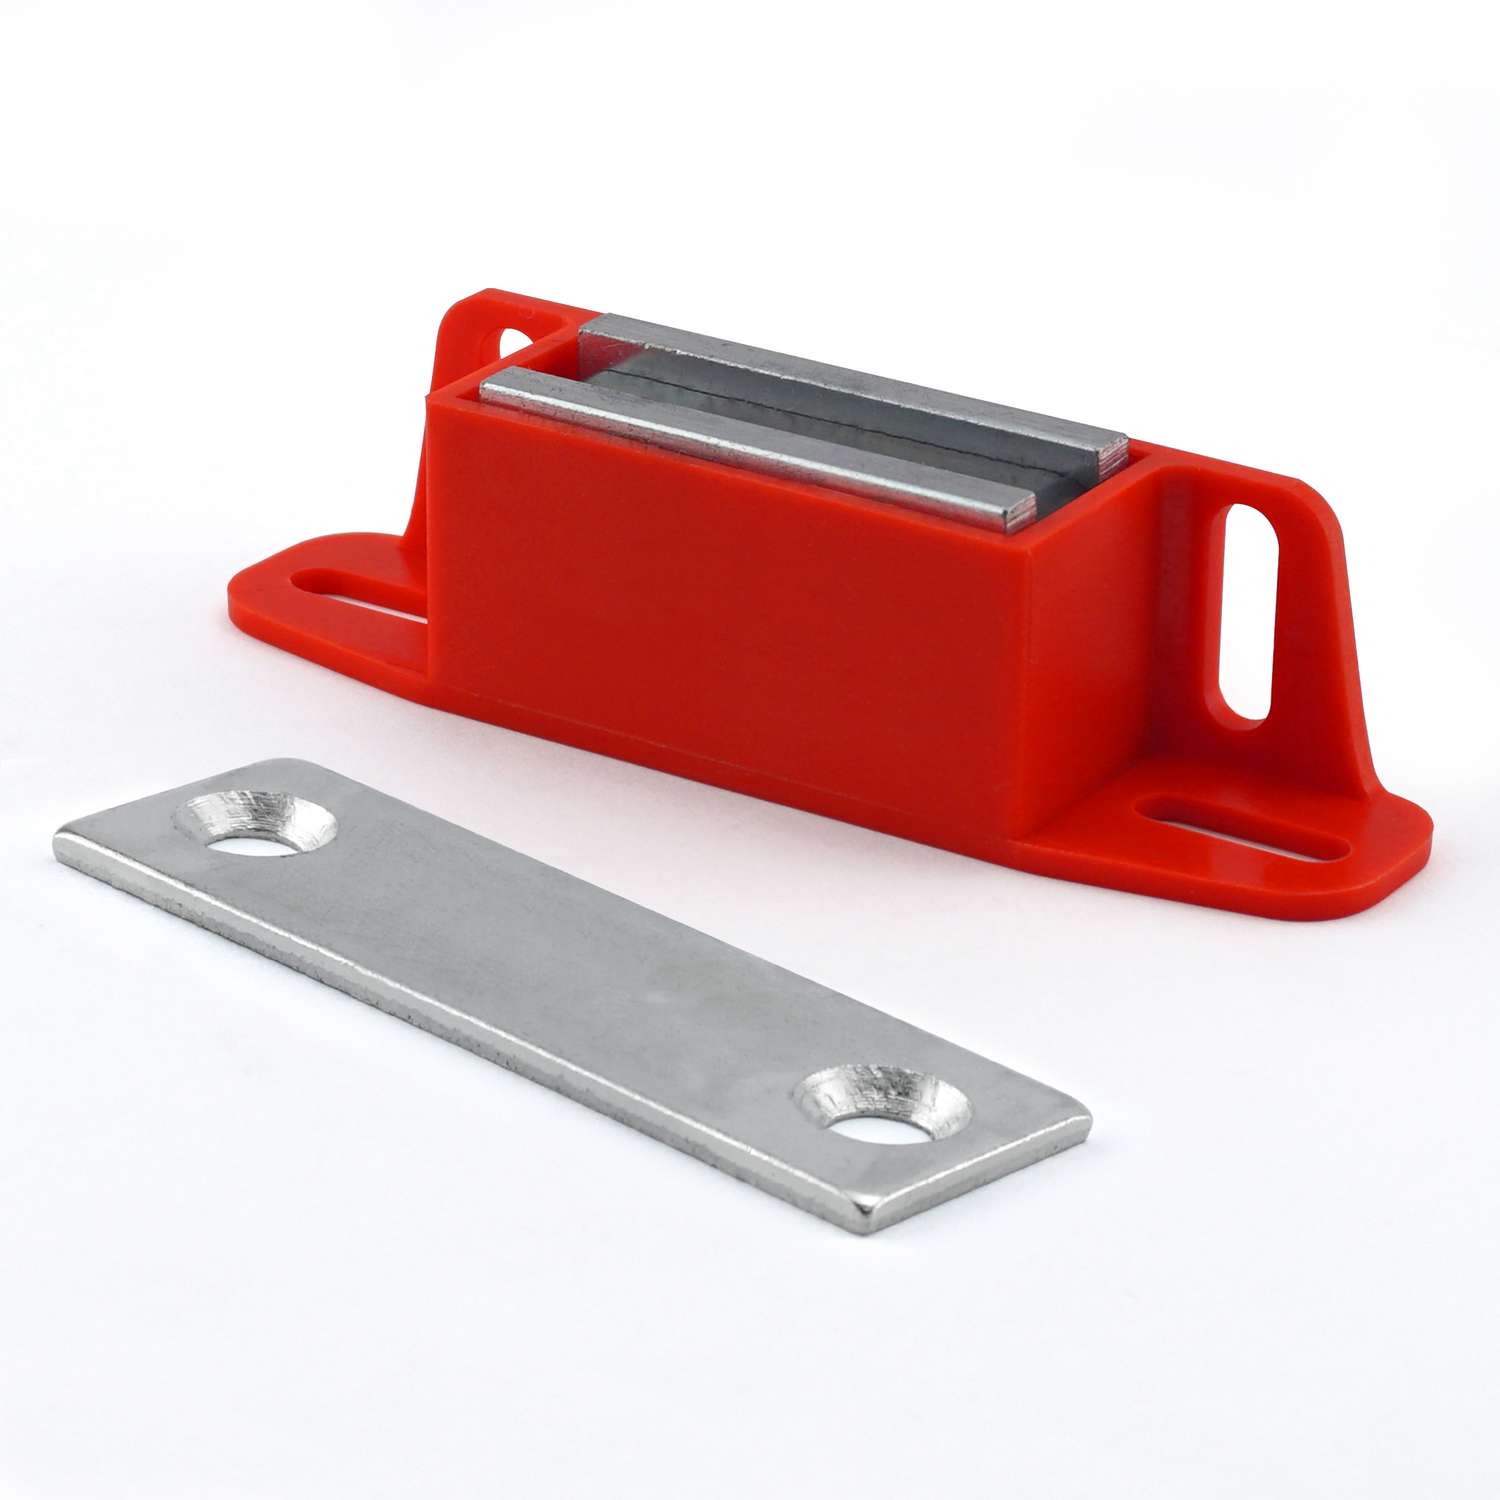 Master Magnetics 5.25 in Pull Hang/Hold 07501 Ceramic HANDLE MAGNET Red 100 lb 